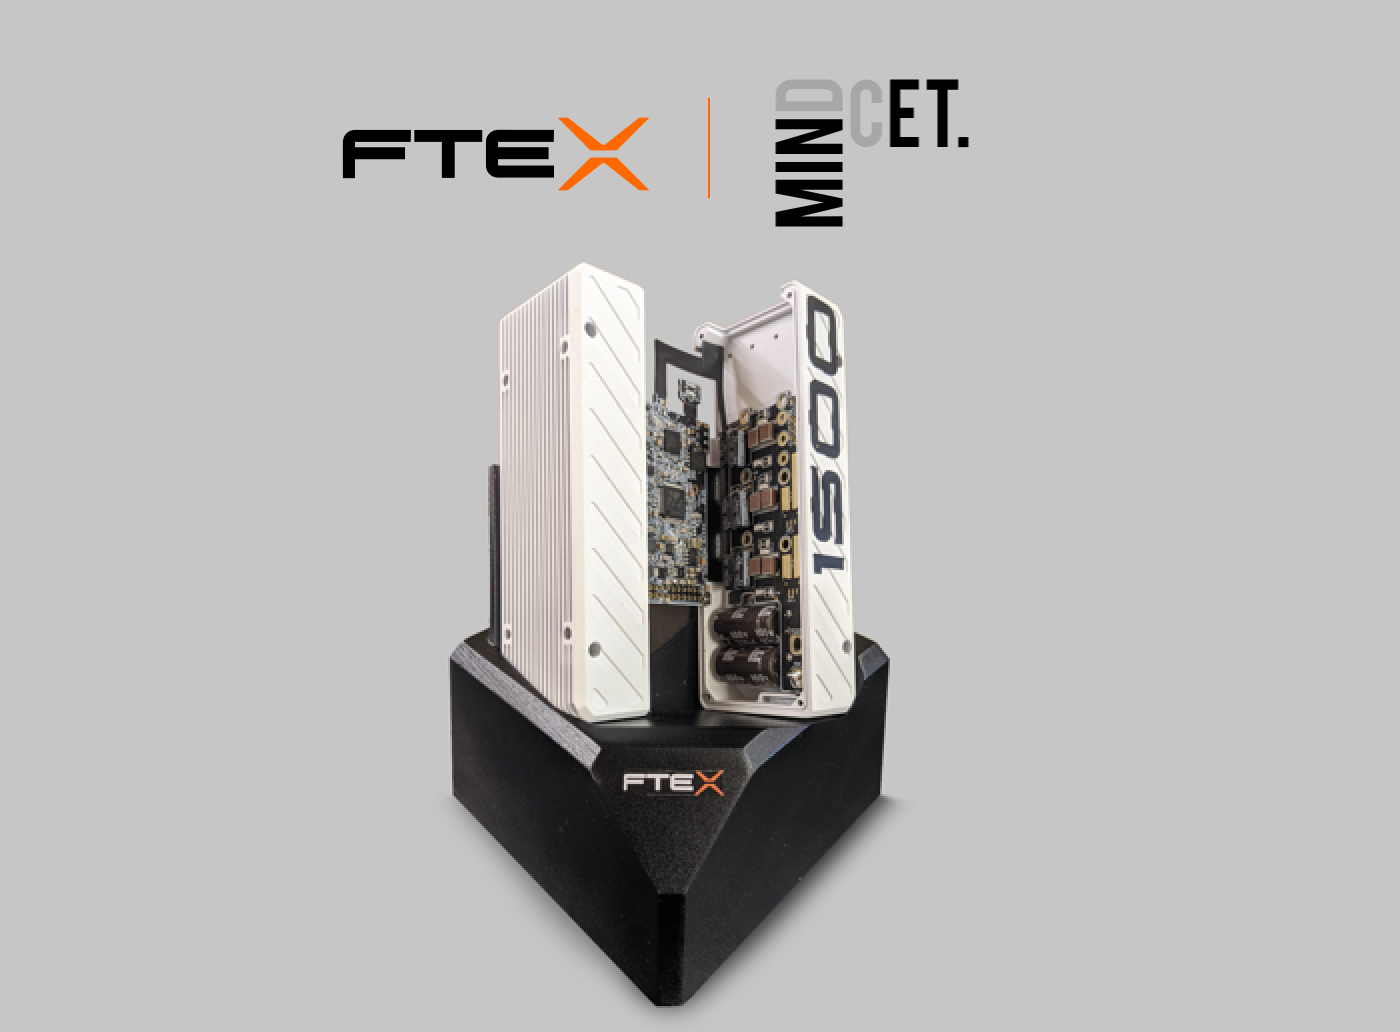 MinDCet drivers and FTEX powertrain solutions enable EV GaN applications